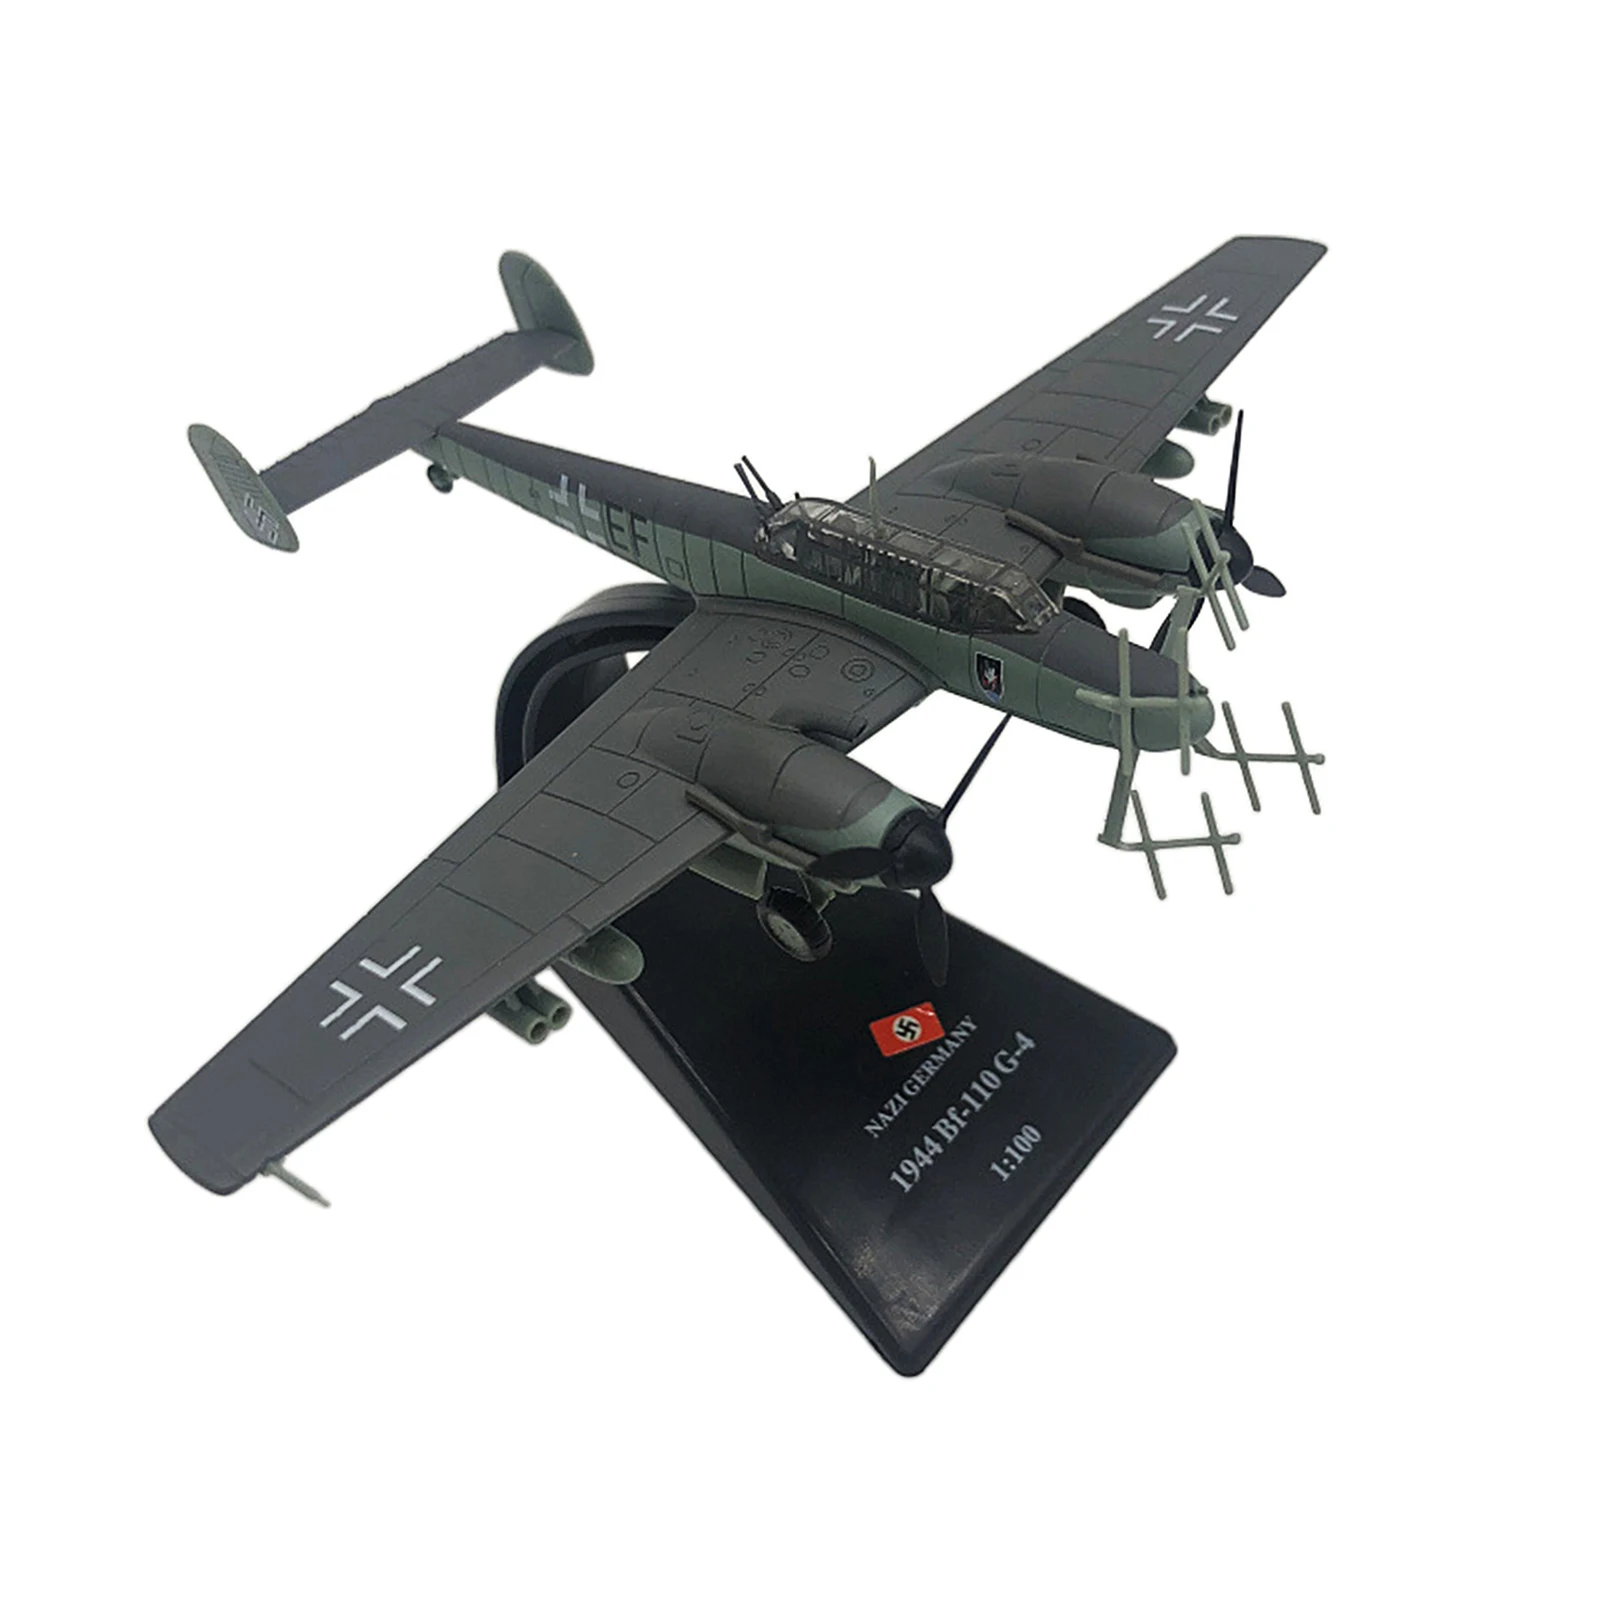 BF-110 Heavy Fighter Model with Alloy Wing 1/100 Scale Aircraft Model Plane Collection Gift Home Living Room Decor 12x16cm